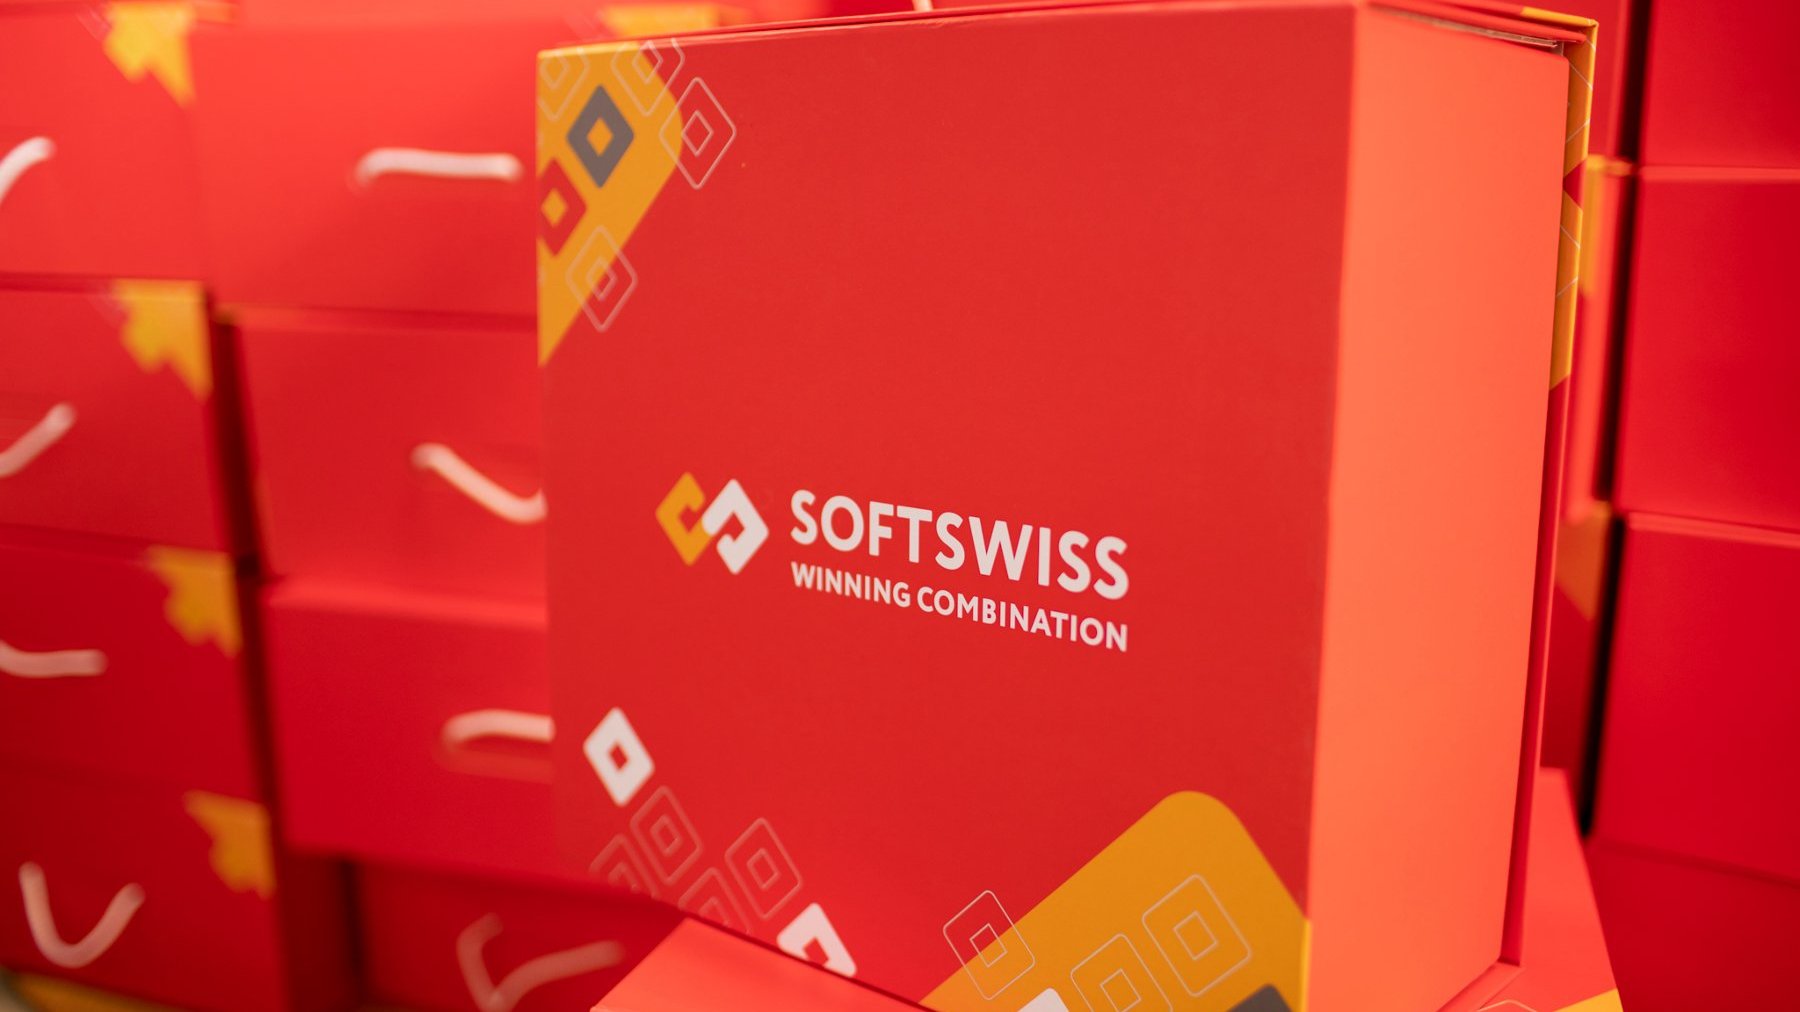 Softswiss, based in Poznań, plans to increase the number of employees by as much as 50%.